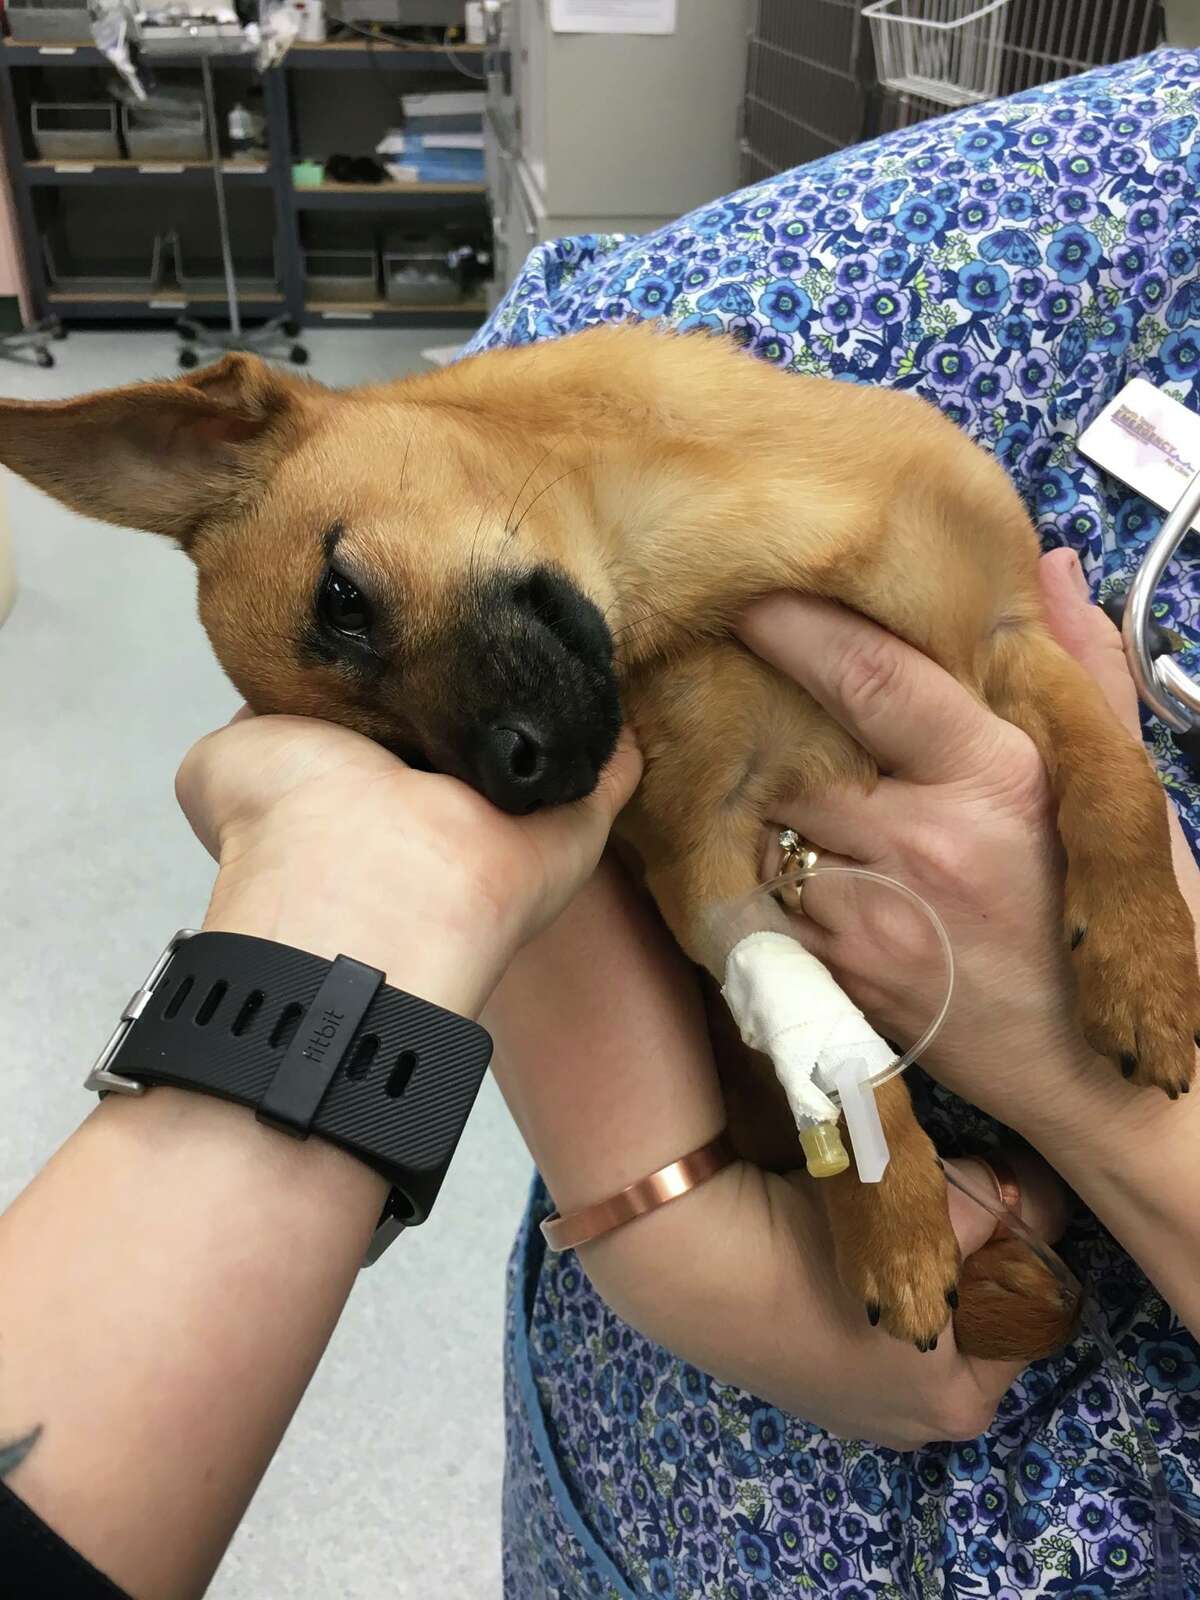 A Carrollton Police Department officer found a dog eating heroin in a parked truck on Saturday and saved it's life with treatment help from the North Texas Emergency Pet Clinic. 